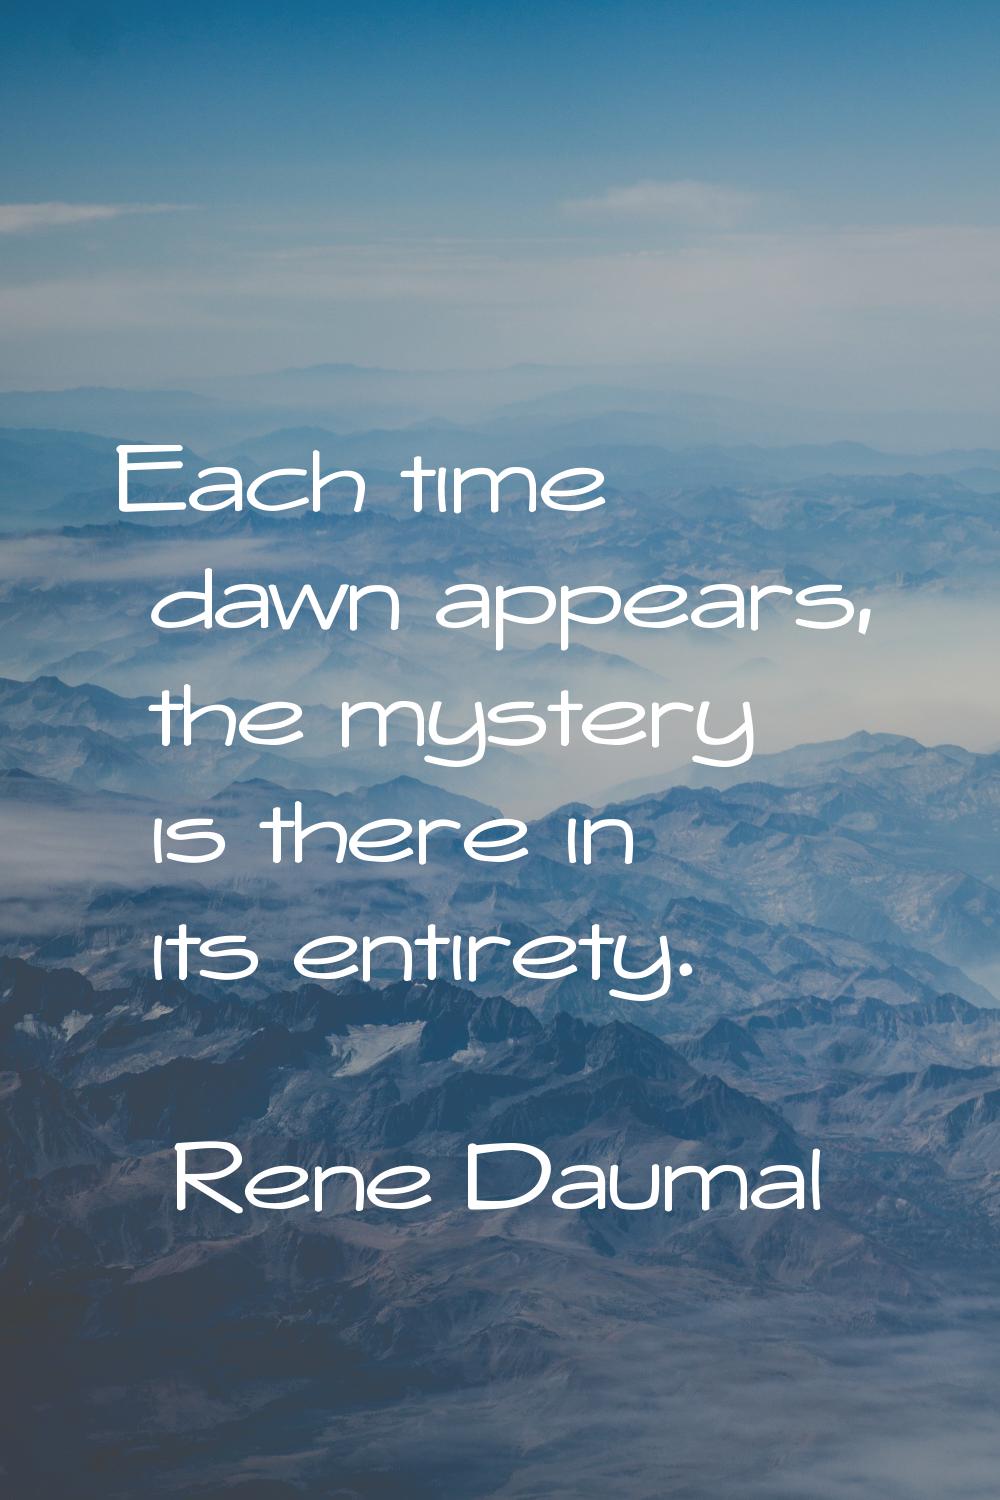 Each time dawn appears, the mystery is there in its entirety.